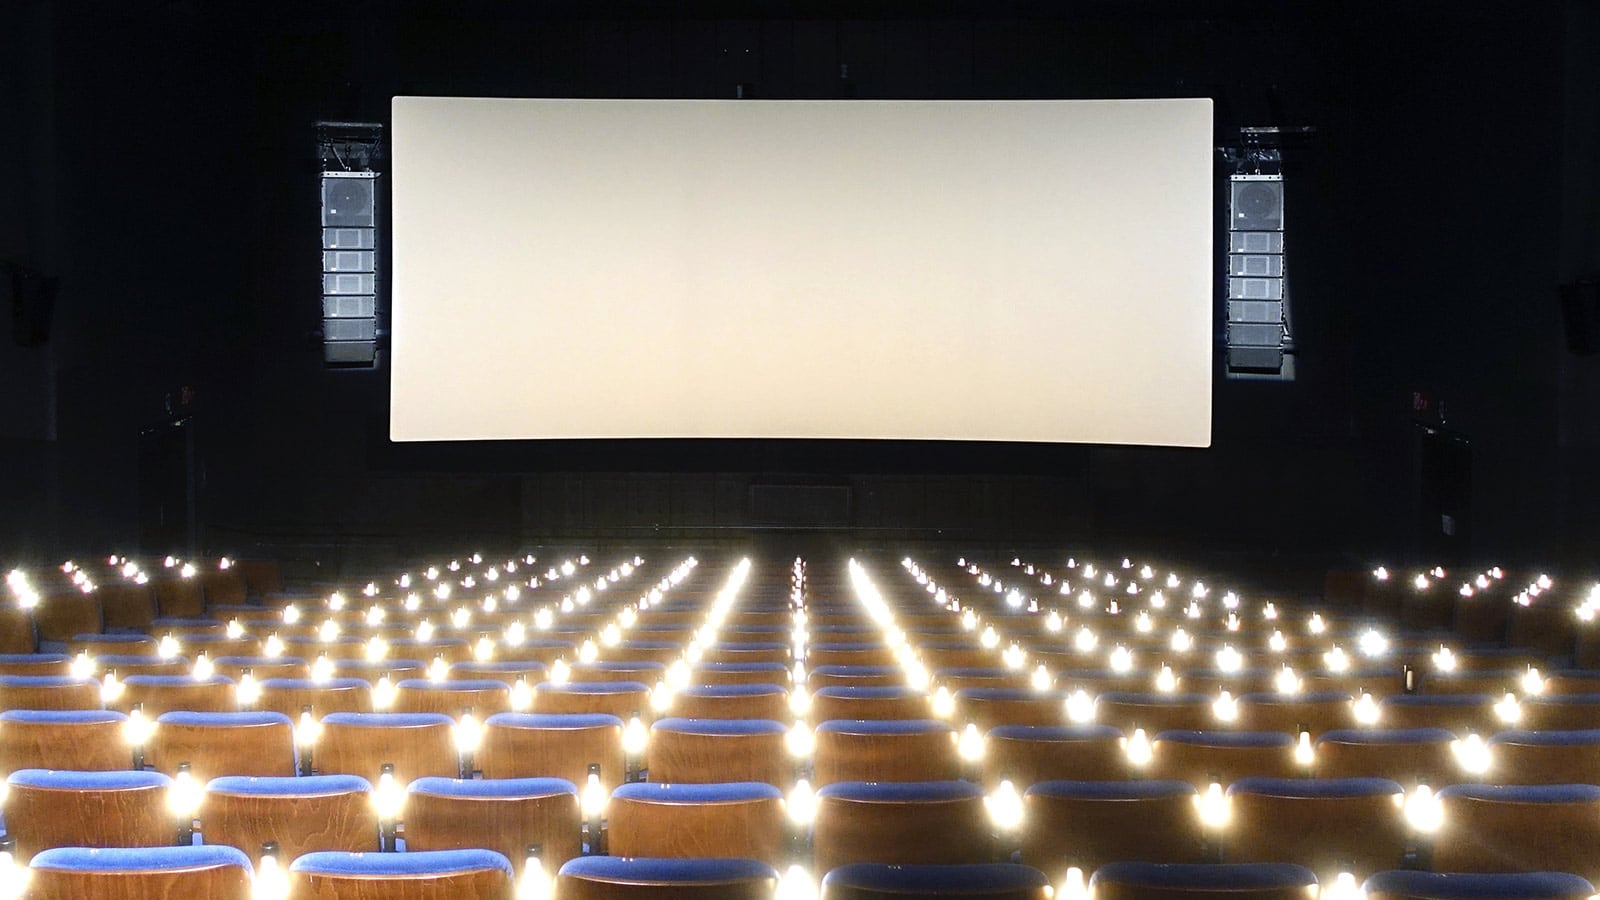 Meyer Sound LEOPARD “Exceeds the Ordinary” at Japan’s Tachikawa Cinema Two